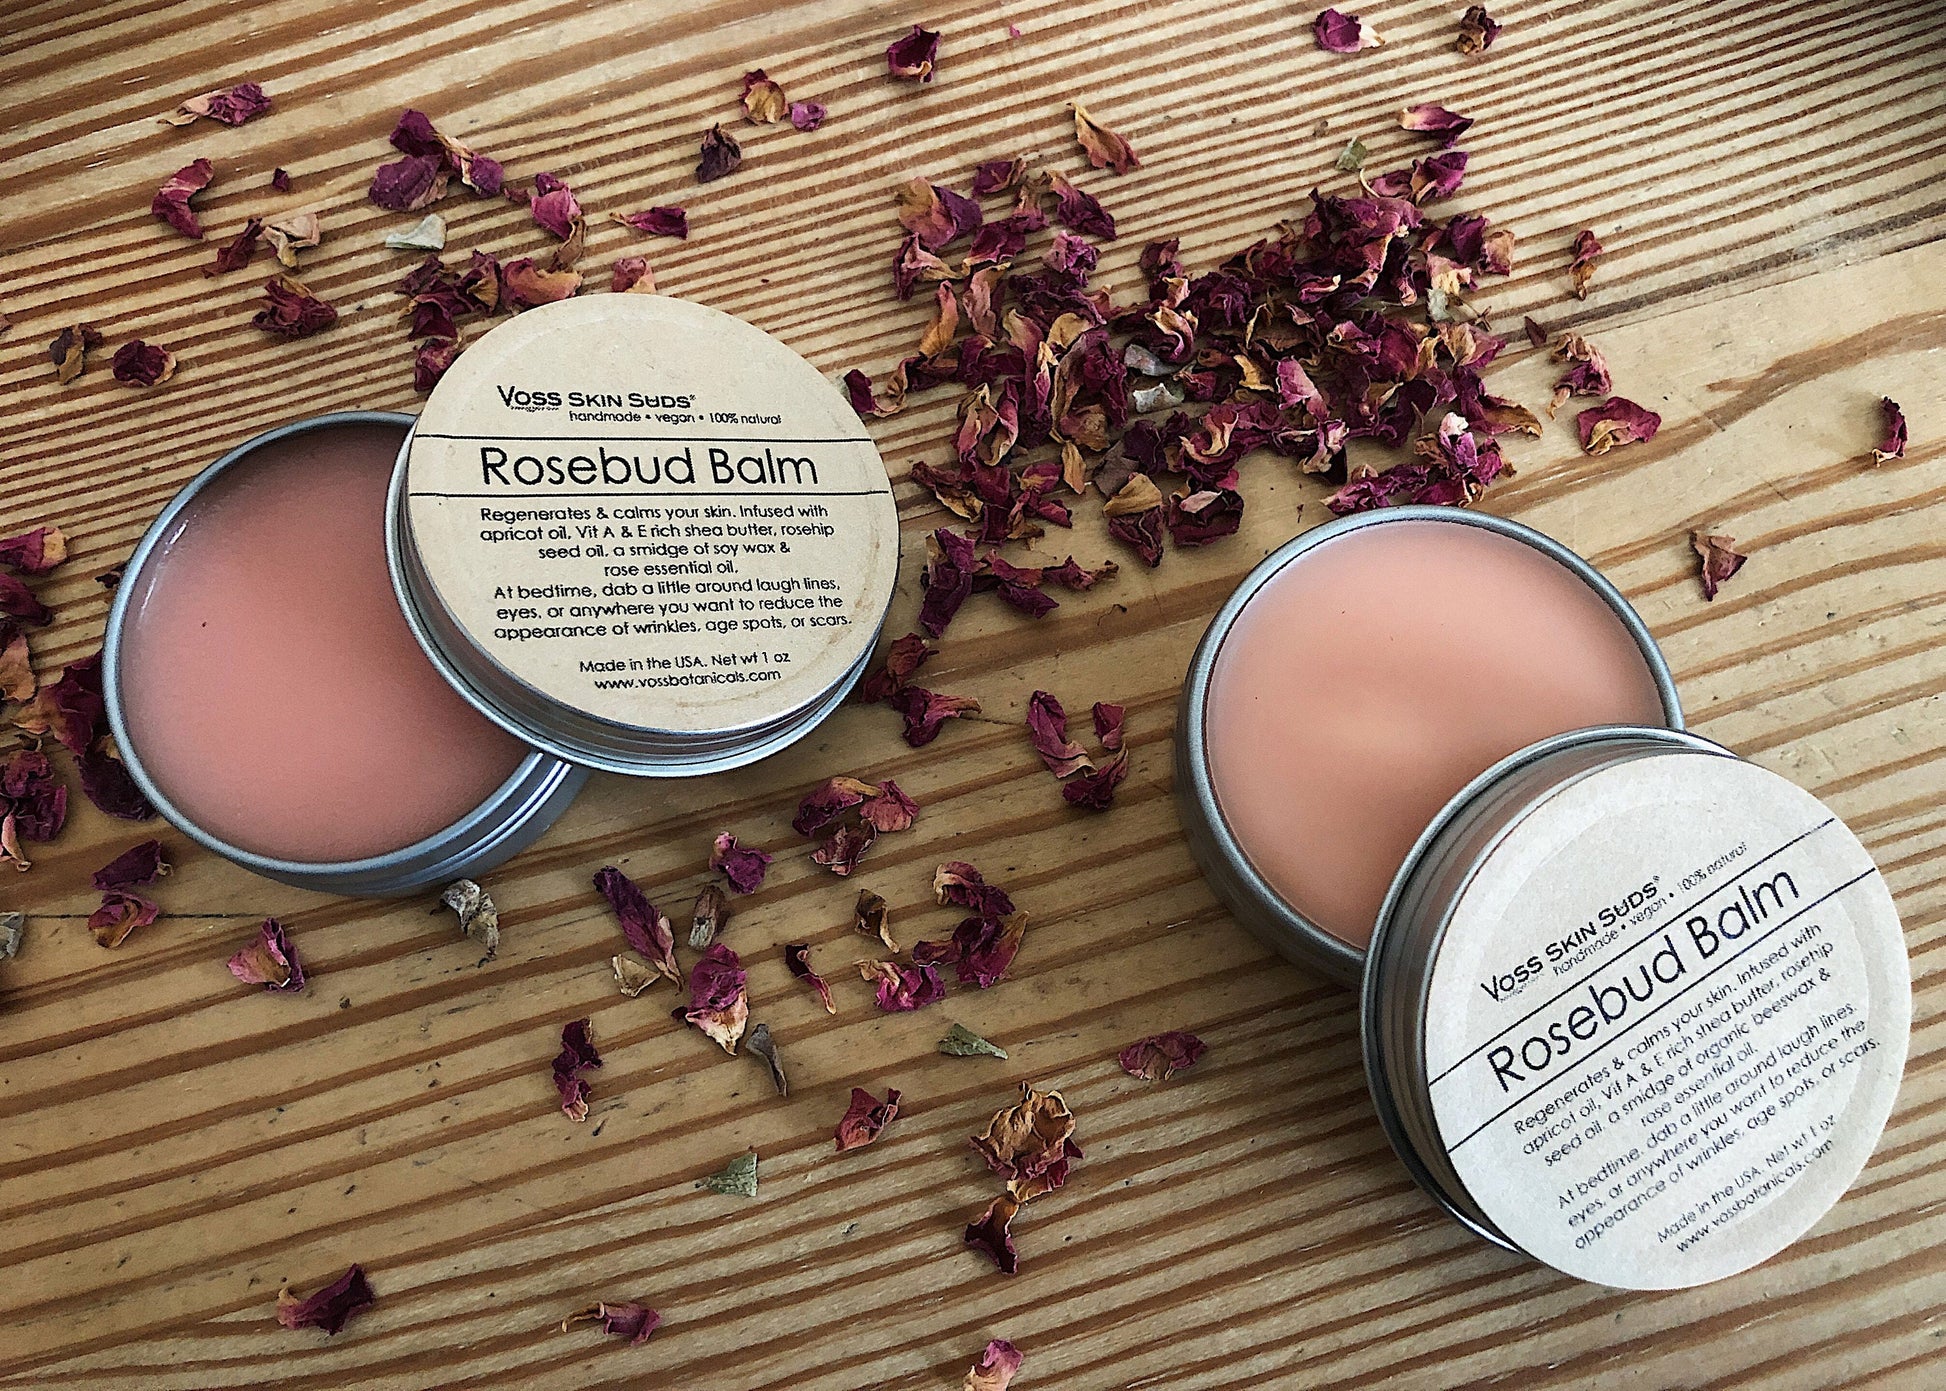 Rose balm with Shea butter PRODUCT FOOTPRINTS Natural ingredients Phthalate, Sulfate, Petroleum & Paraben Free Vegan Free of Synthetic Fragrances Free of Synthetic Dyes GMO & Gluten-free Non Toxic Handmade Sustainable Innovation Made in the USA Cruelty Free Zero Waste Low Carbon Footprint eco friendly   Holiday care package gift box gift for her relaxation gift self care box self care gift box spa gift box spa gift set thank you gift box birthday gift new mom gift relaxing bath set spa gift set spa kit